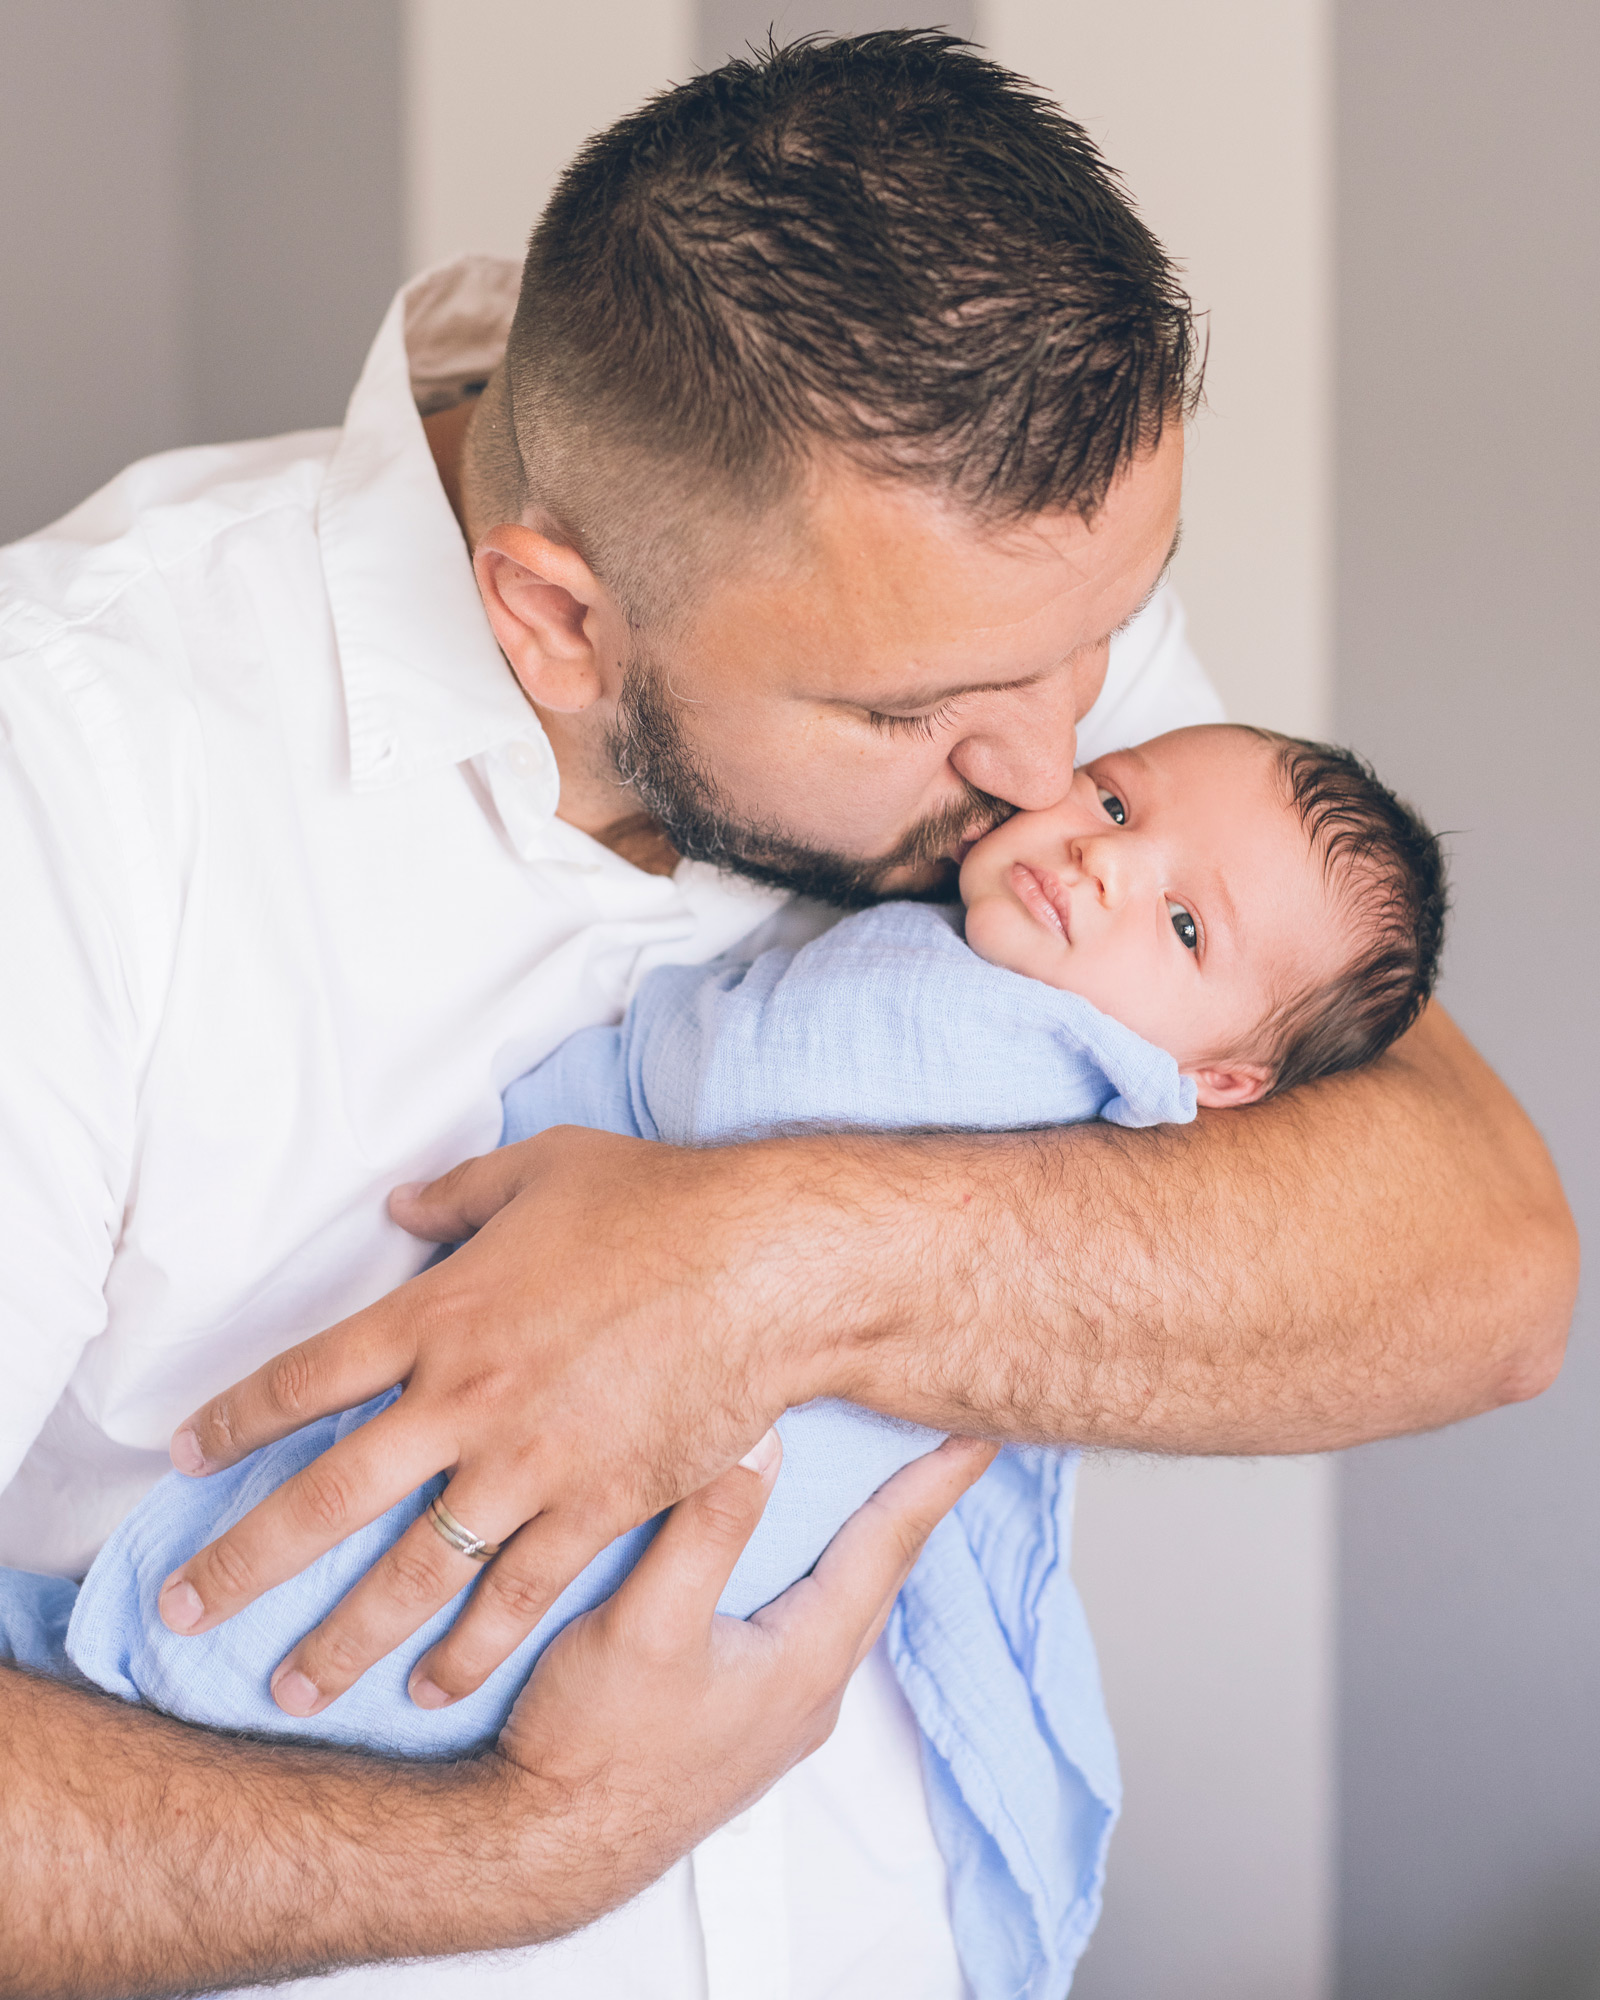 father-holding-and-kissing-his-newborn-baby-boy.jpg